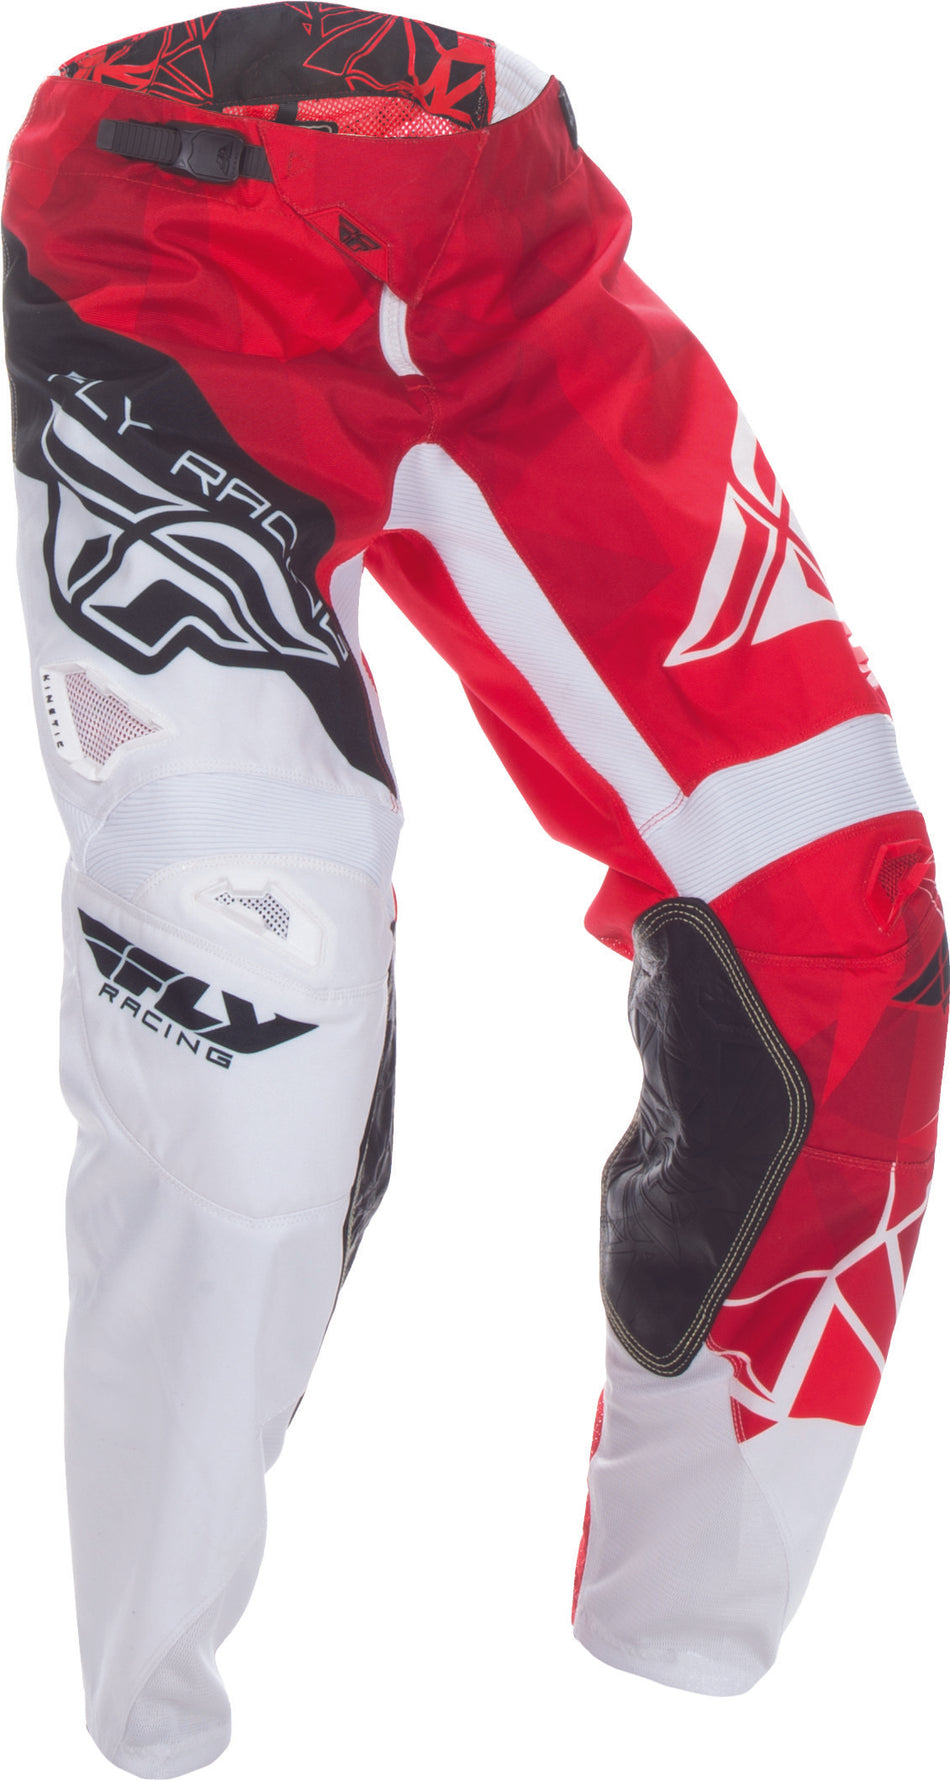 FLY RACING Kinetic Crux Pant Red/White Sz 38 370-53238